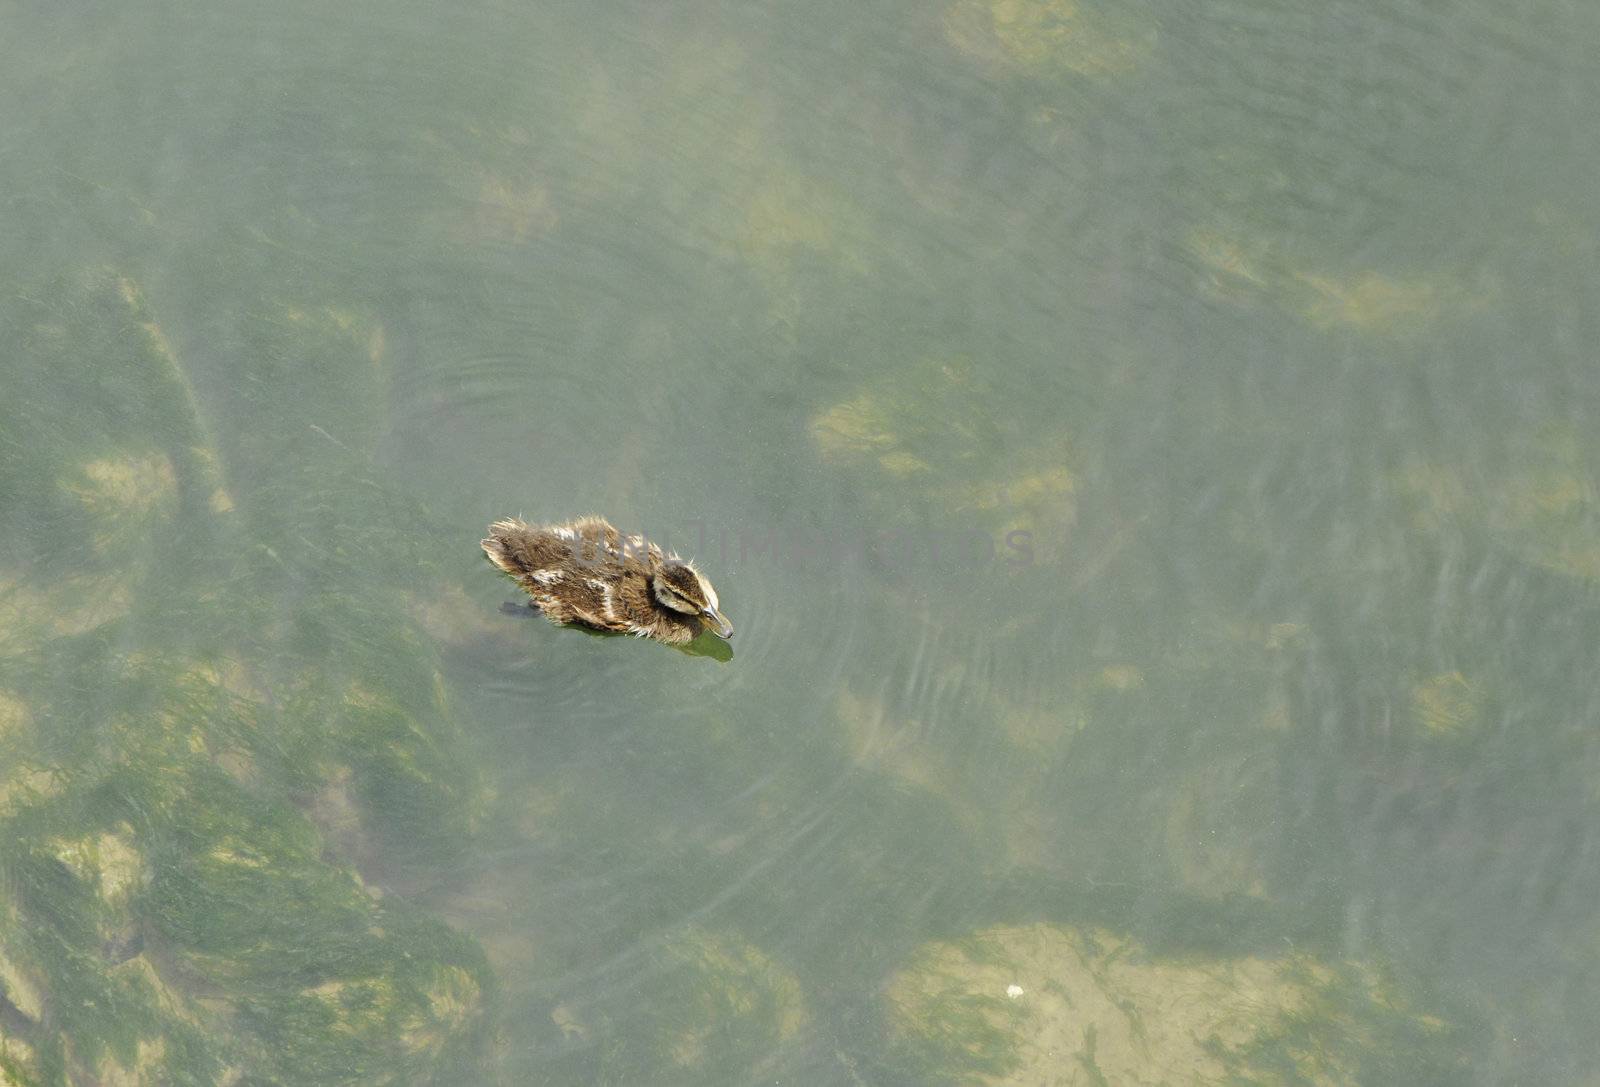 One duckling alone on a green water by shkyo30